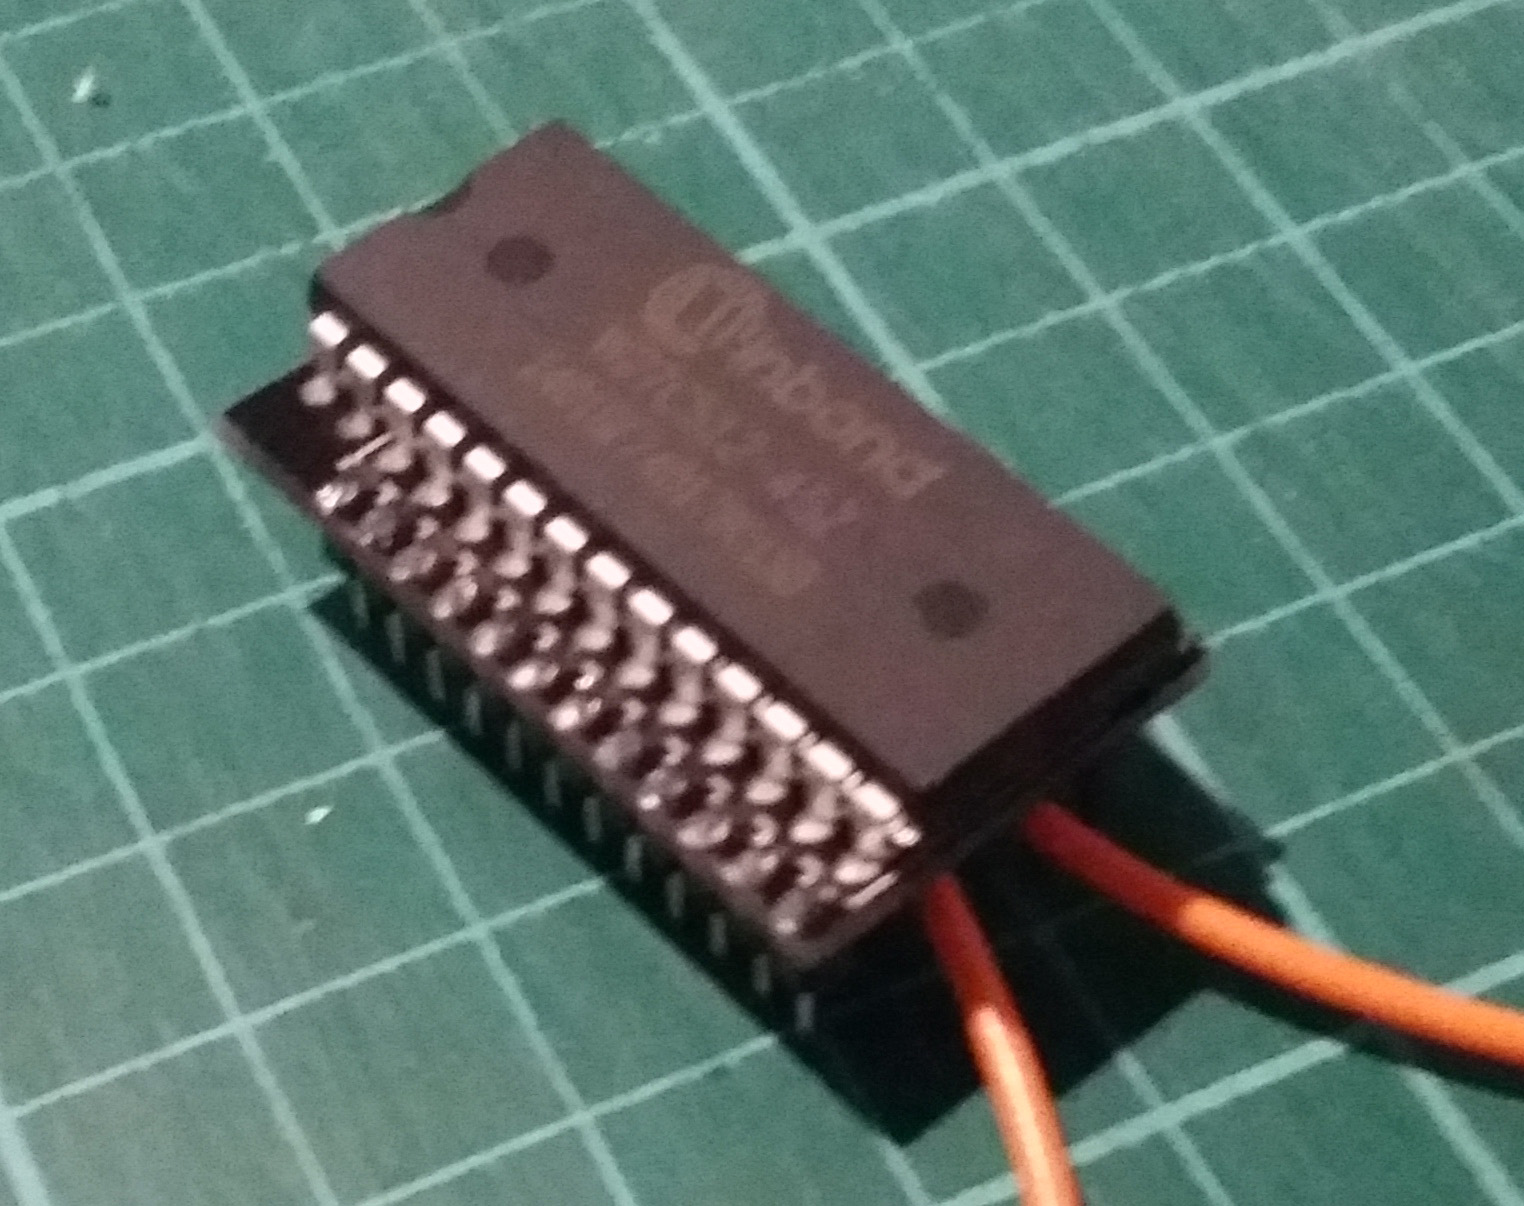 Switchless JiffyDos replacement rom for Commodore 64 Breadbin (L